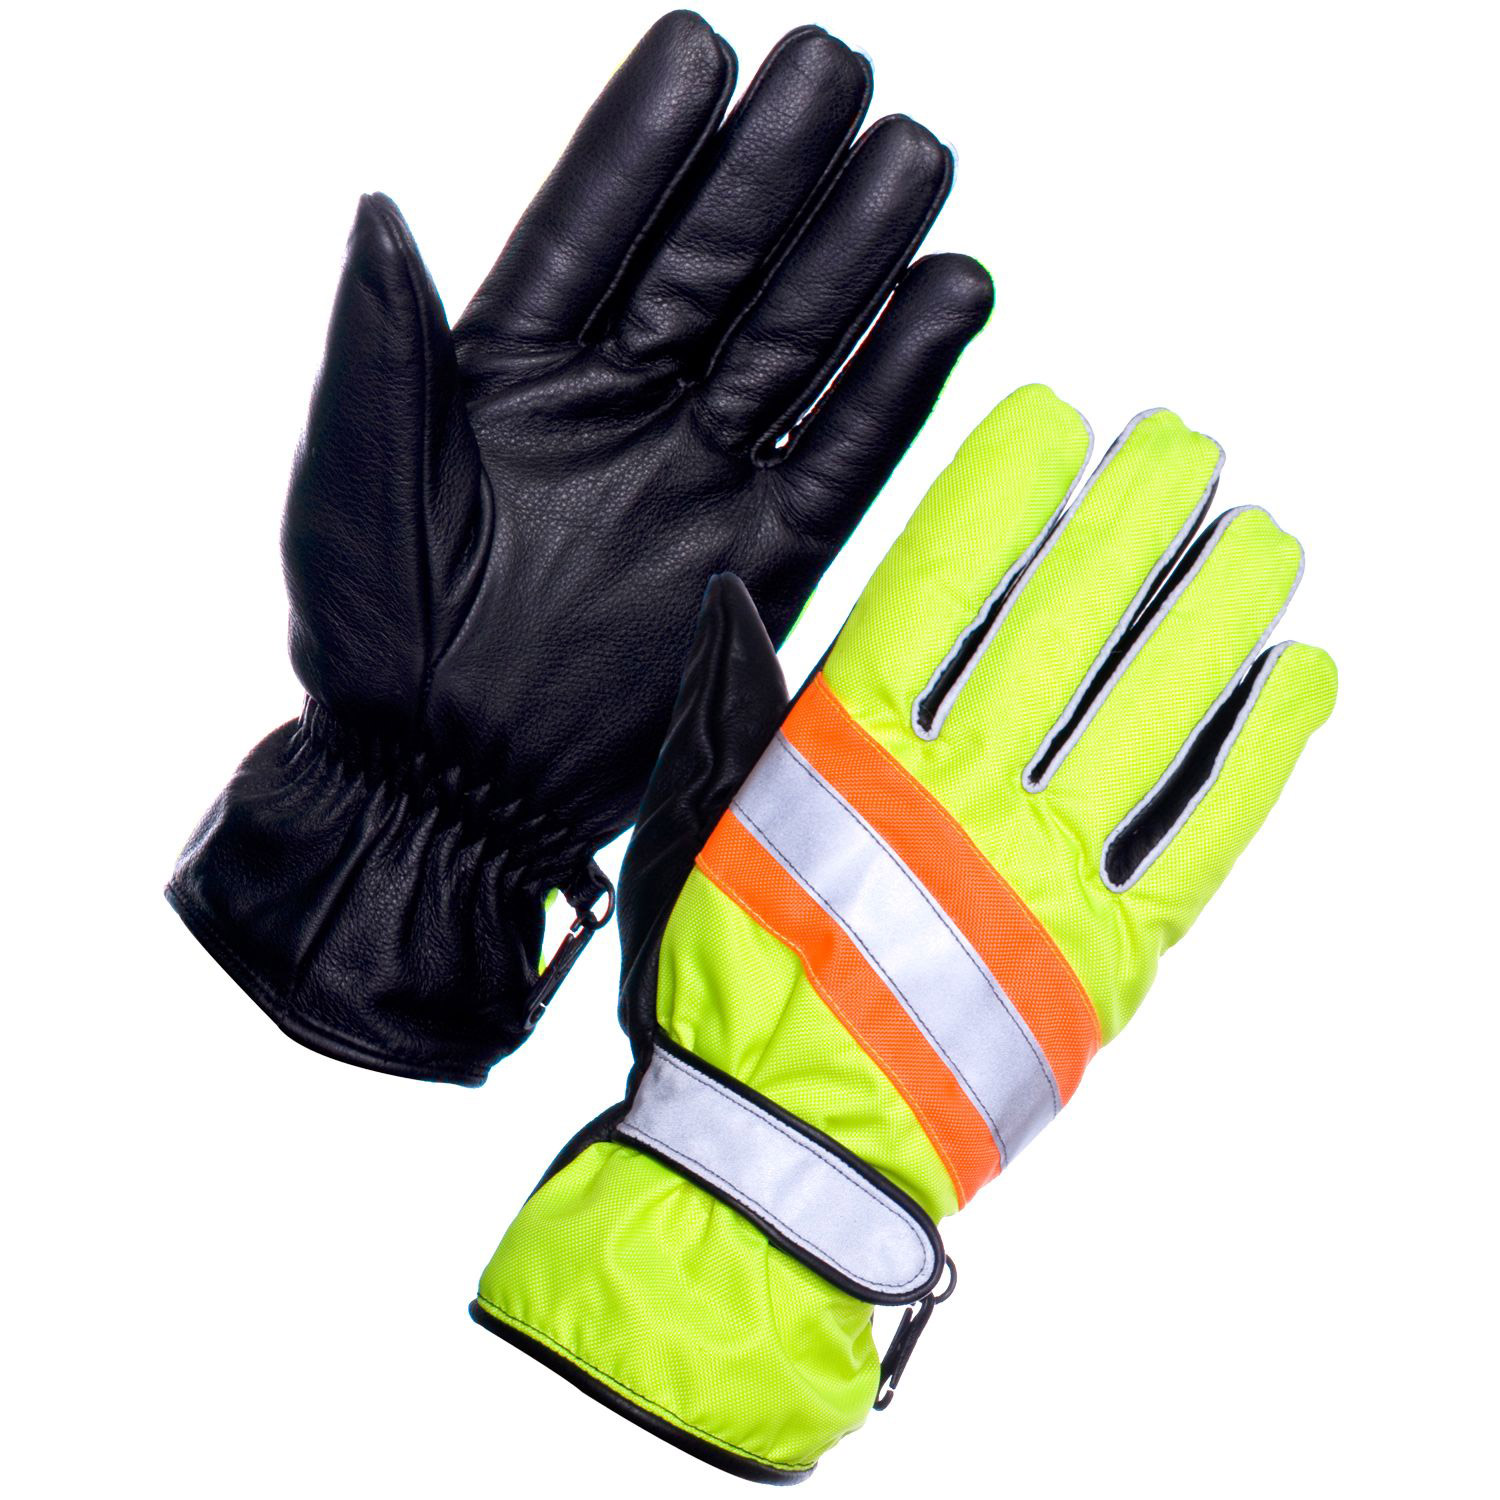 Soft Super Vision Gloves with Thinsulate Liner